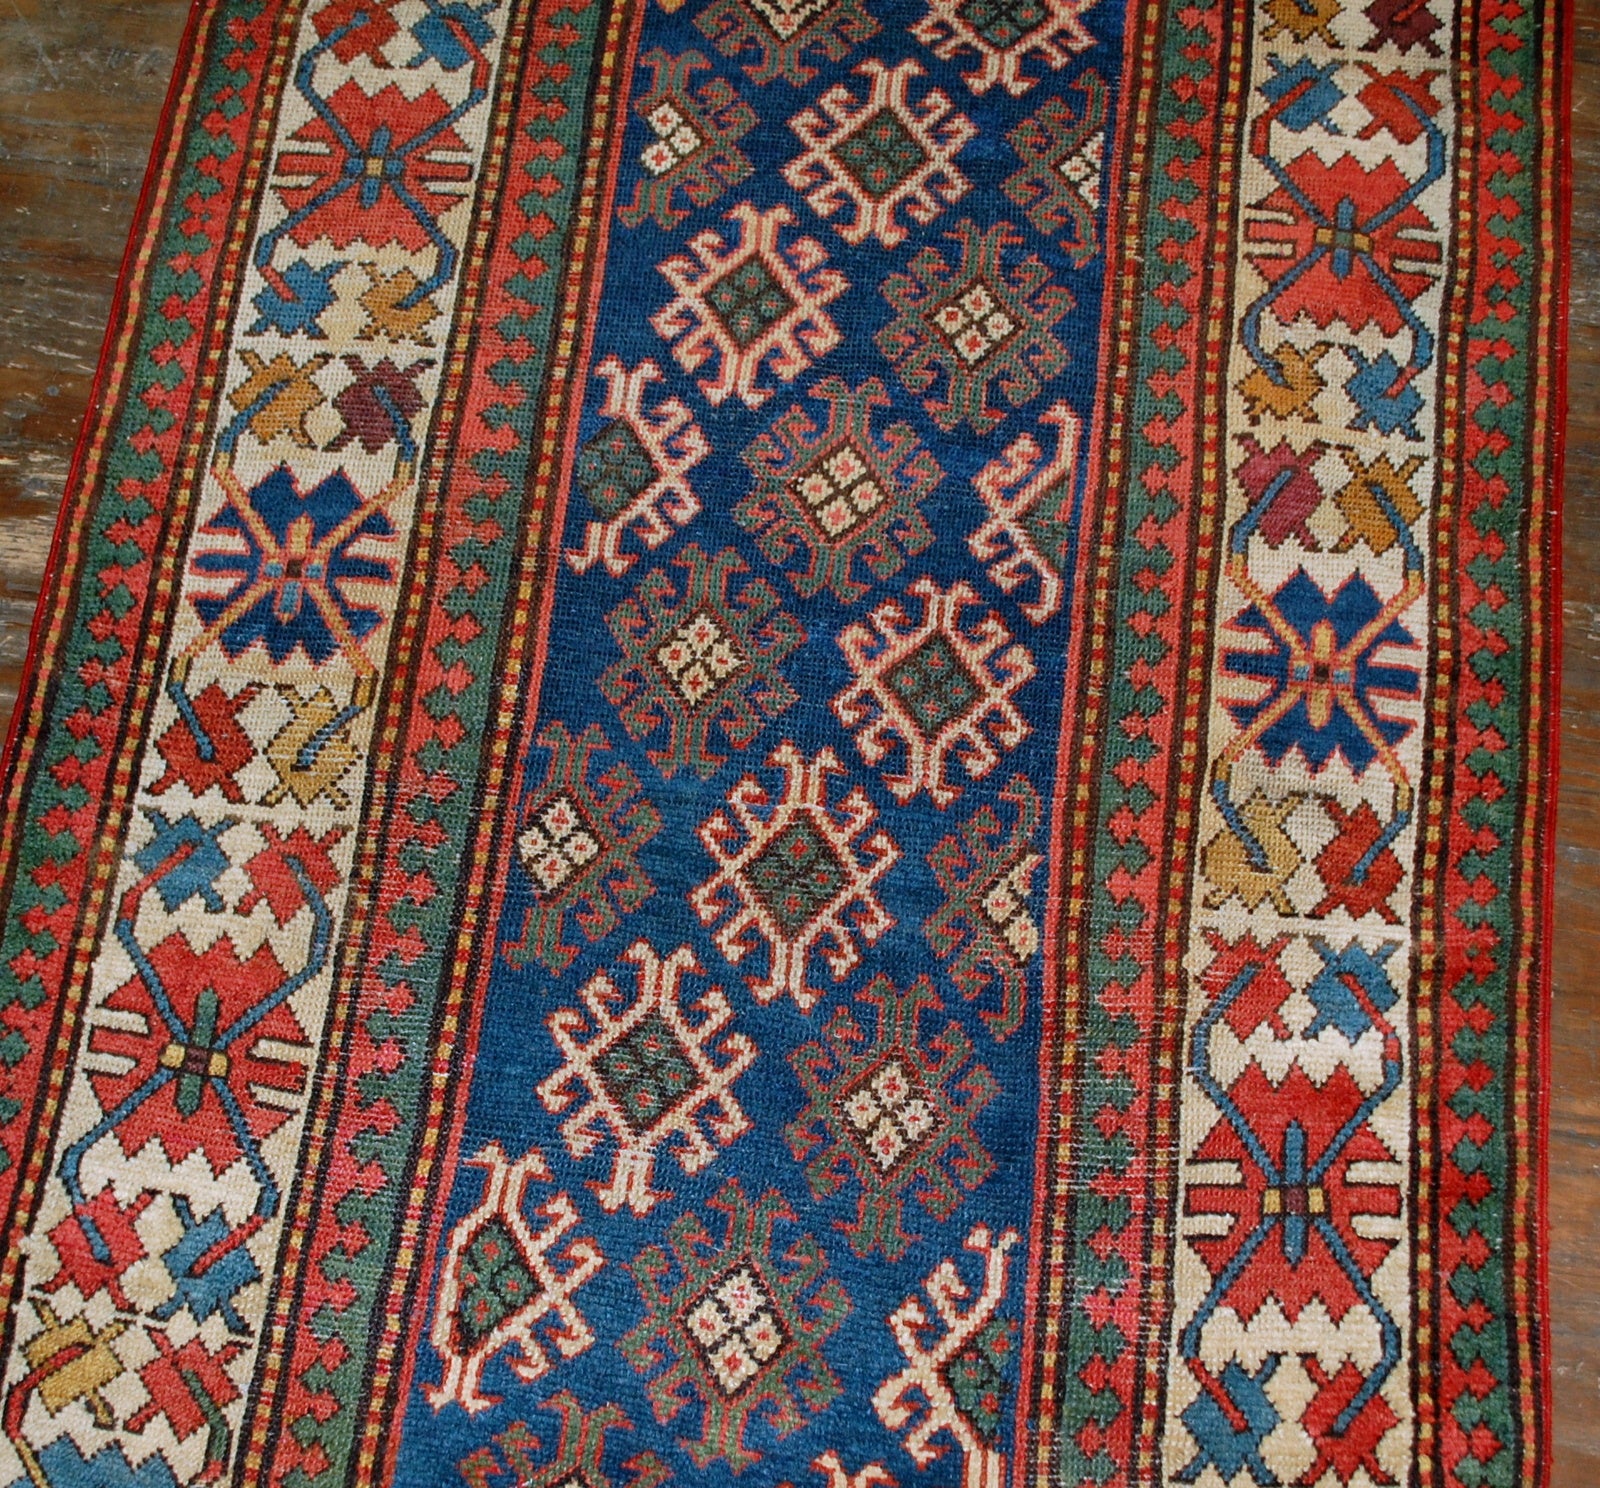 Antique handmade Caucasian Gendje rug in good condition. The rug is from the end of 19th century, made in Russia.